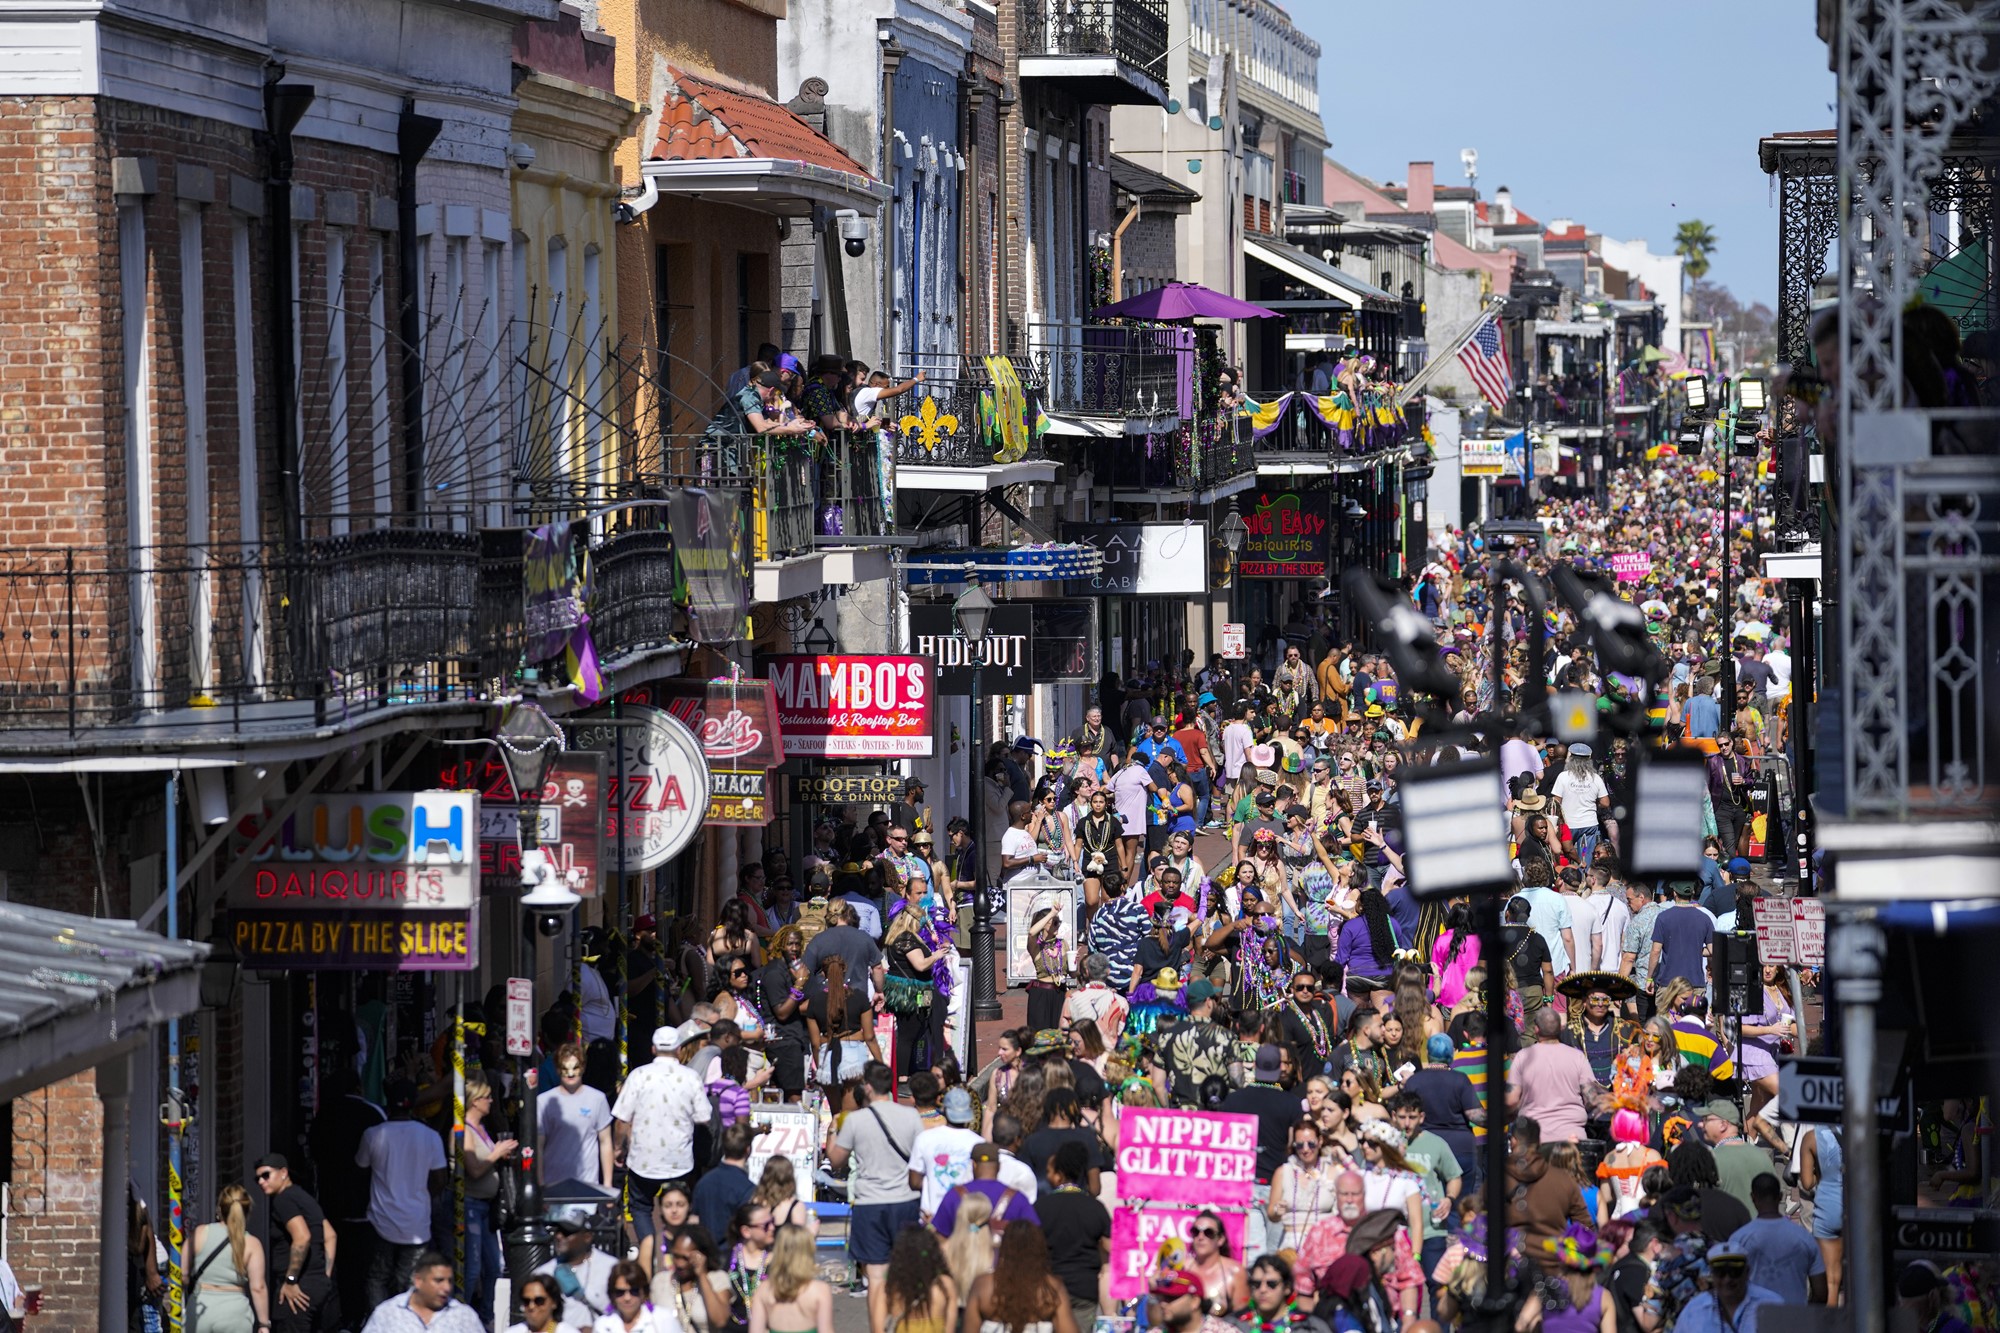 Crowds fill a New Orleans street.